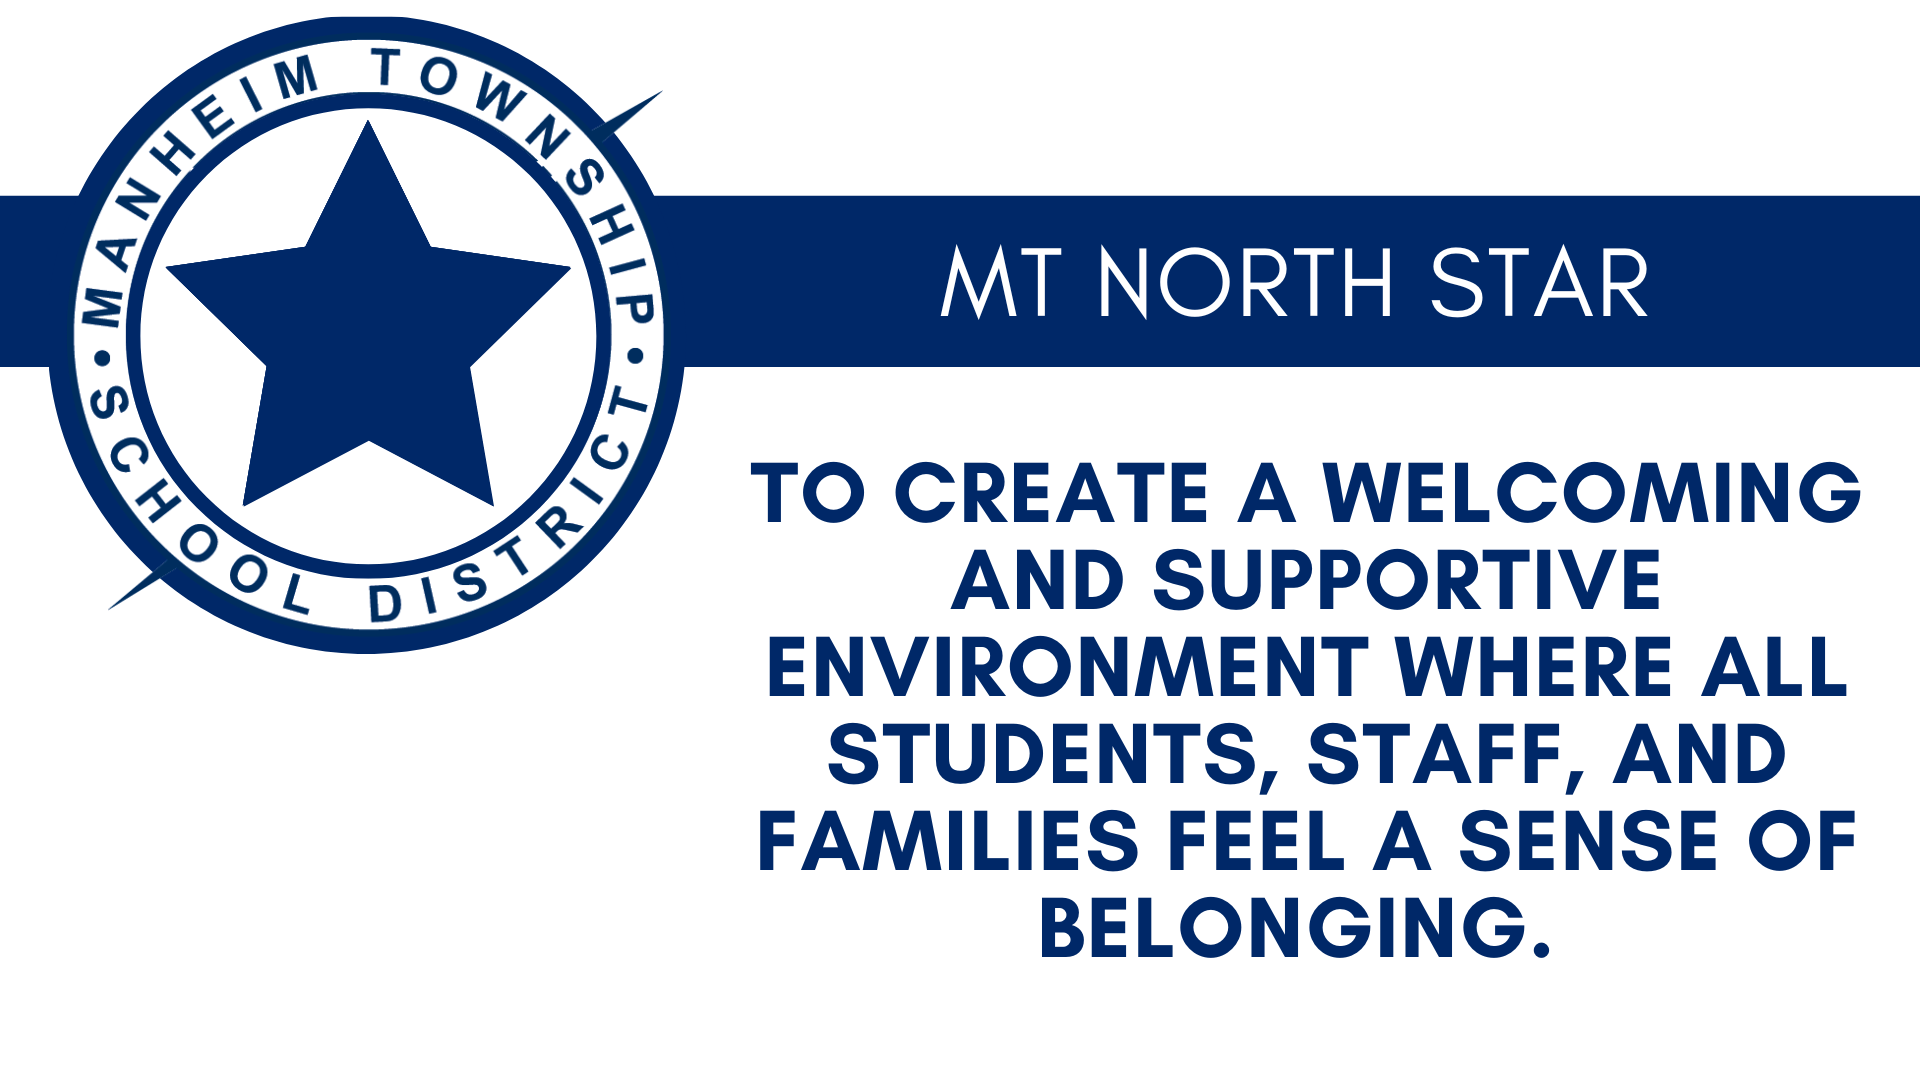 Decorative blue and white graphic with the title "MT North Star" and the words "To create a welcoming and supportive environment where all students, staff, and families feel a sense of belonging."